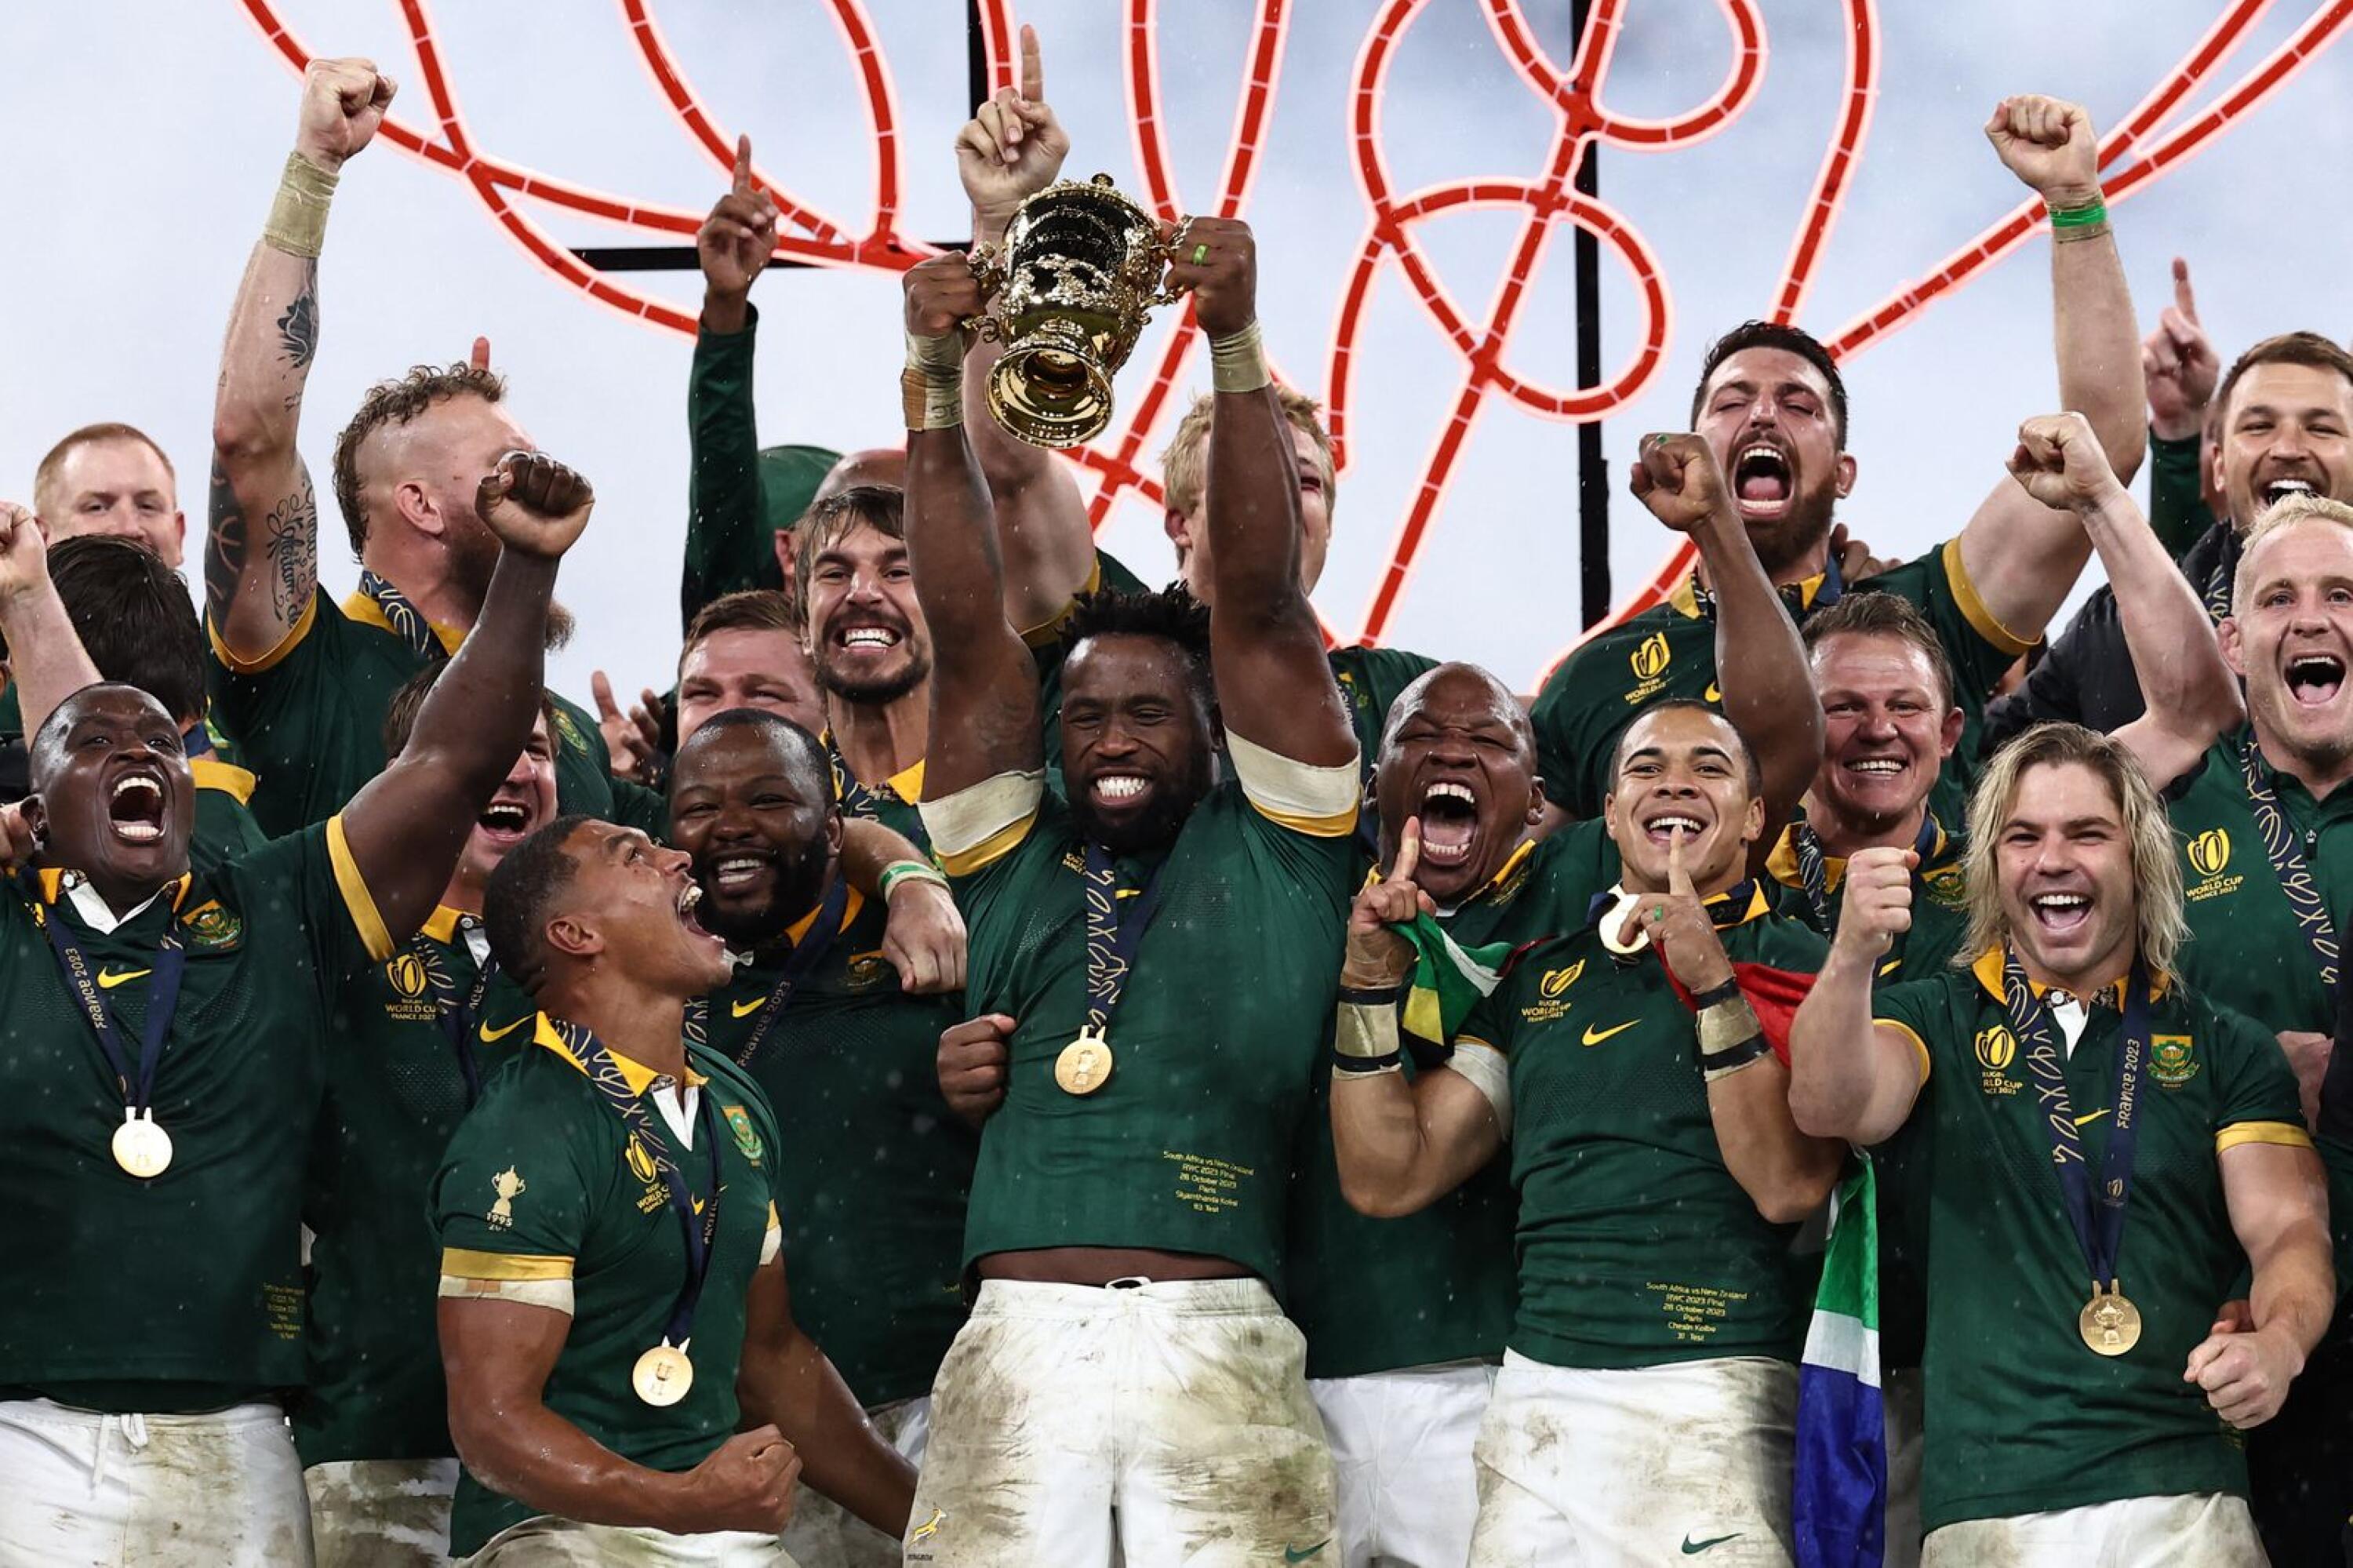 Springbok captain Siya Kolisi lifts the Webb Ellis Cup after they beat the All Blacks in the Rugby World Cup final at Stade de France